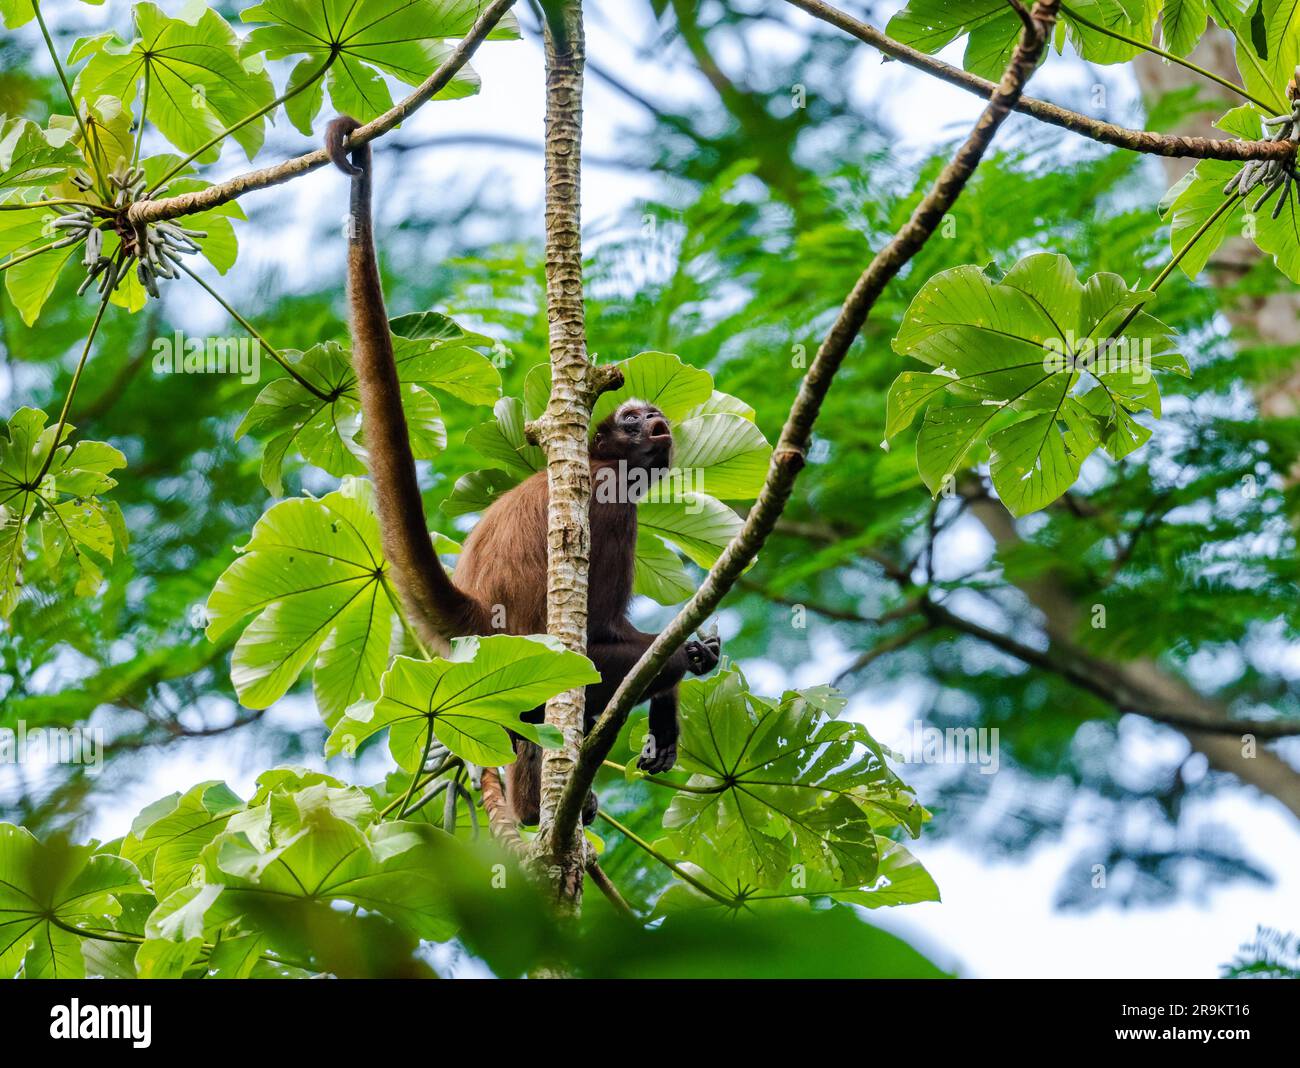 A critically endangered Brown Spider Monkey (Ateles hybridus) foraging in forest. Colombia, South America. Stock Photo